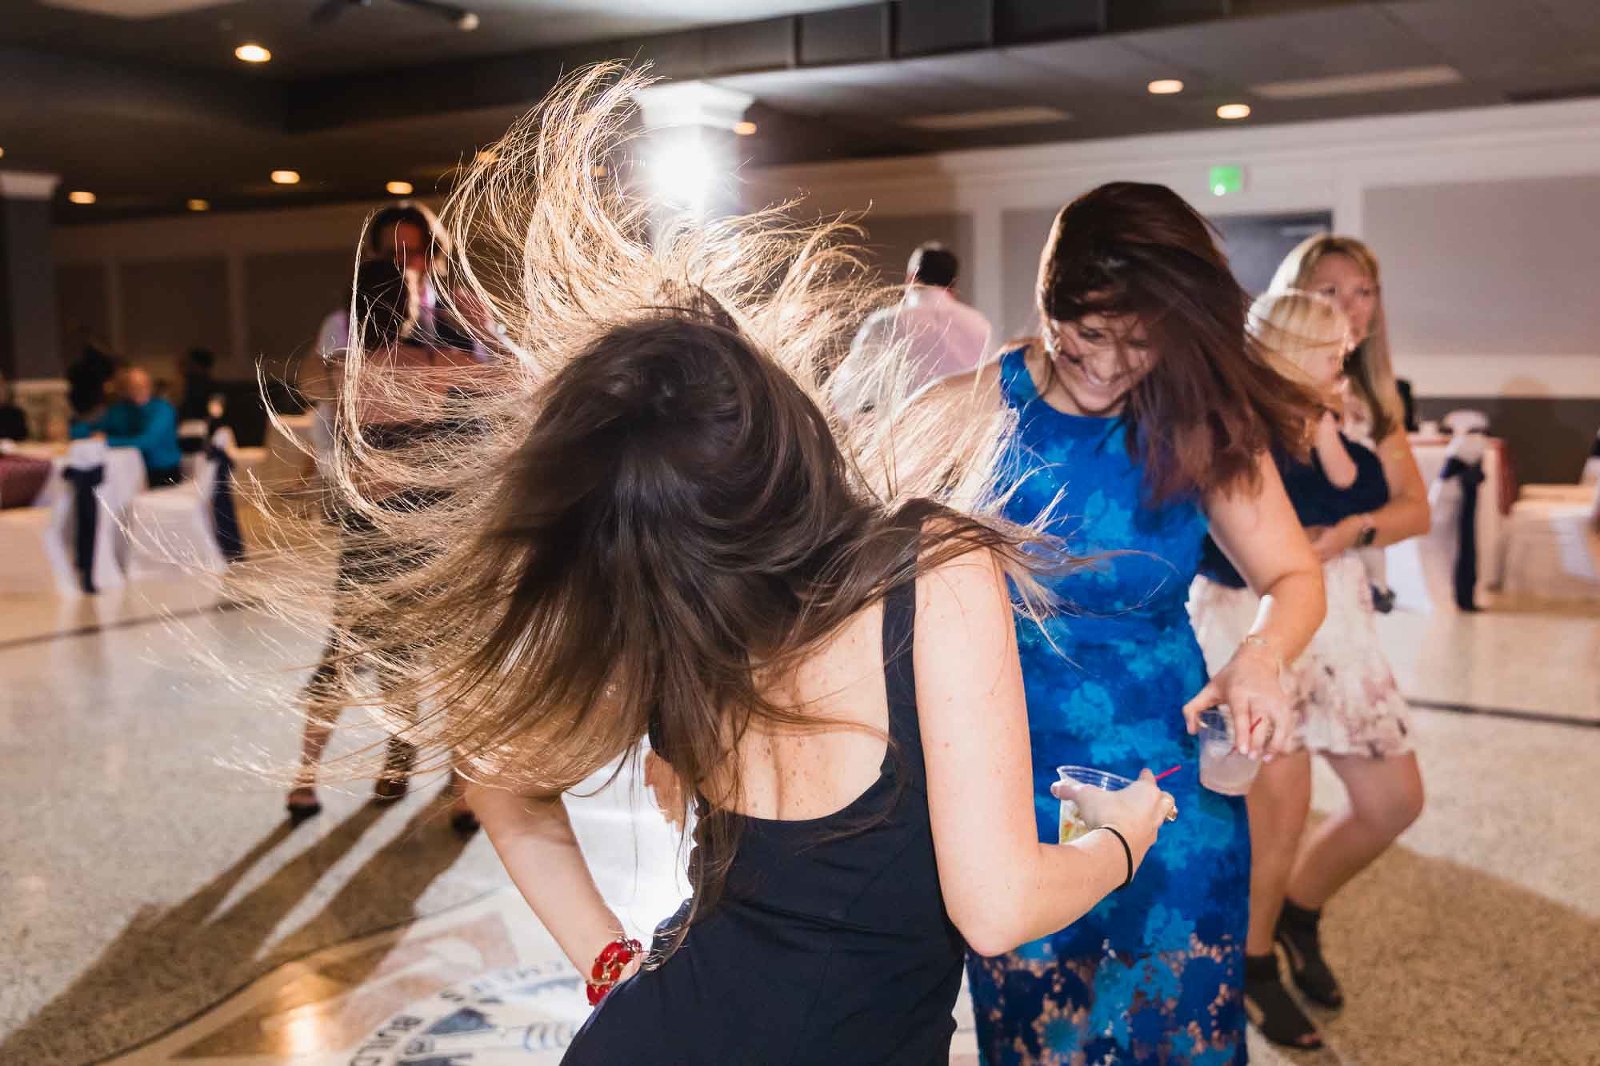 wild dancing at a wedding reception, with girl flipping her hair in the air